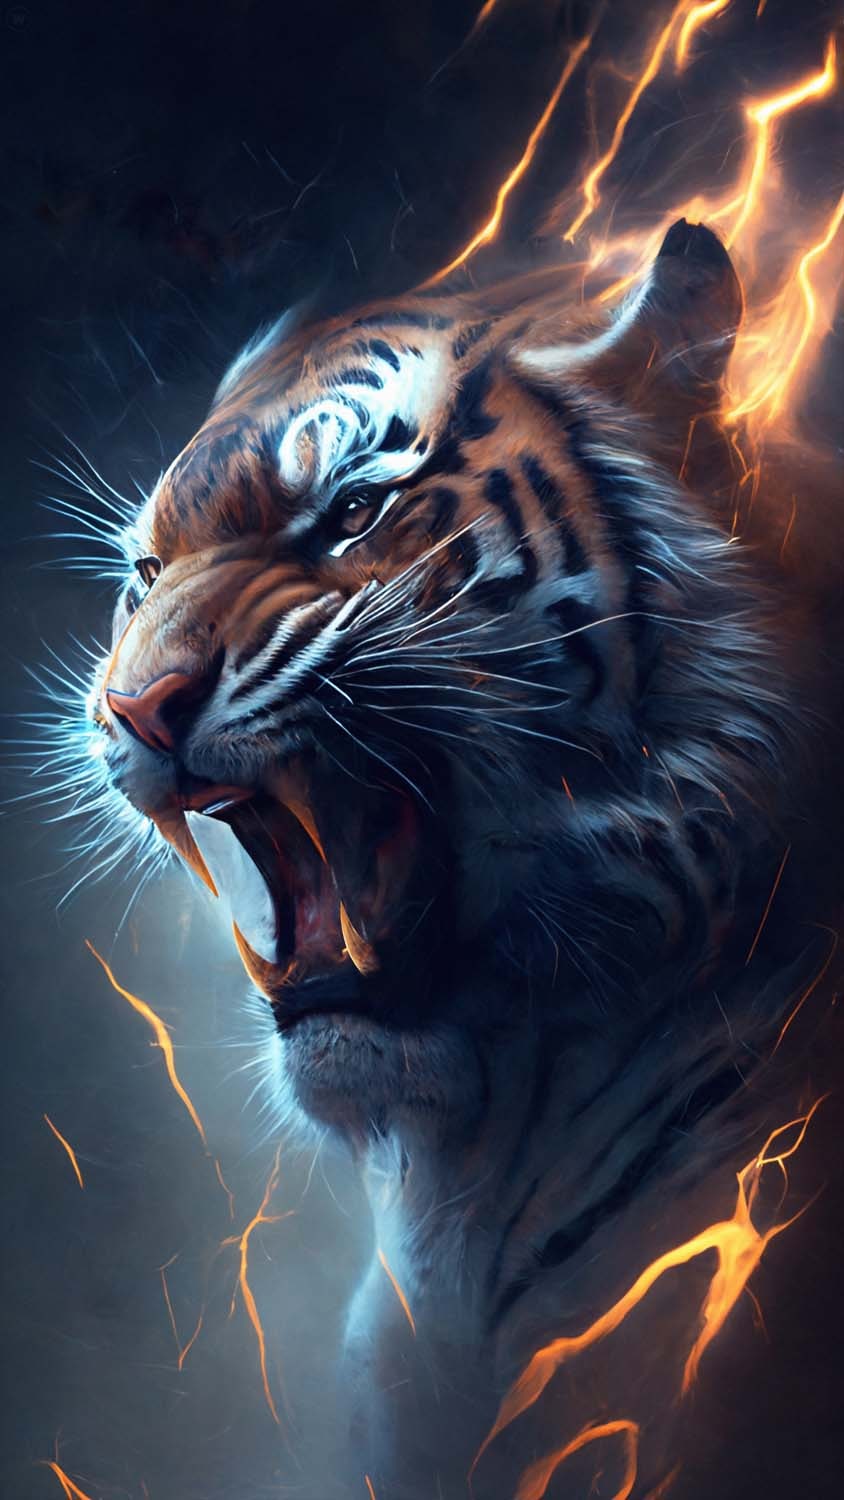 Tiger Force IPhone Wallpaper HD - IPhone Wallpapers : iPhone ...